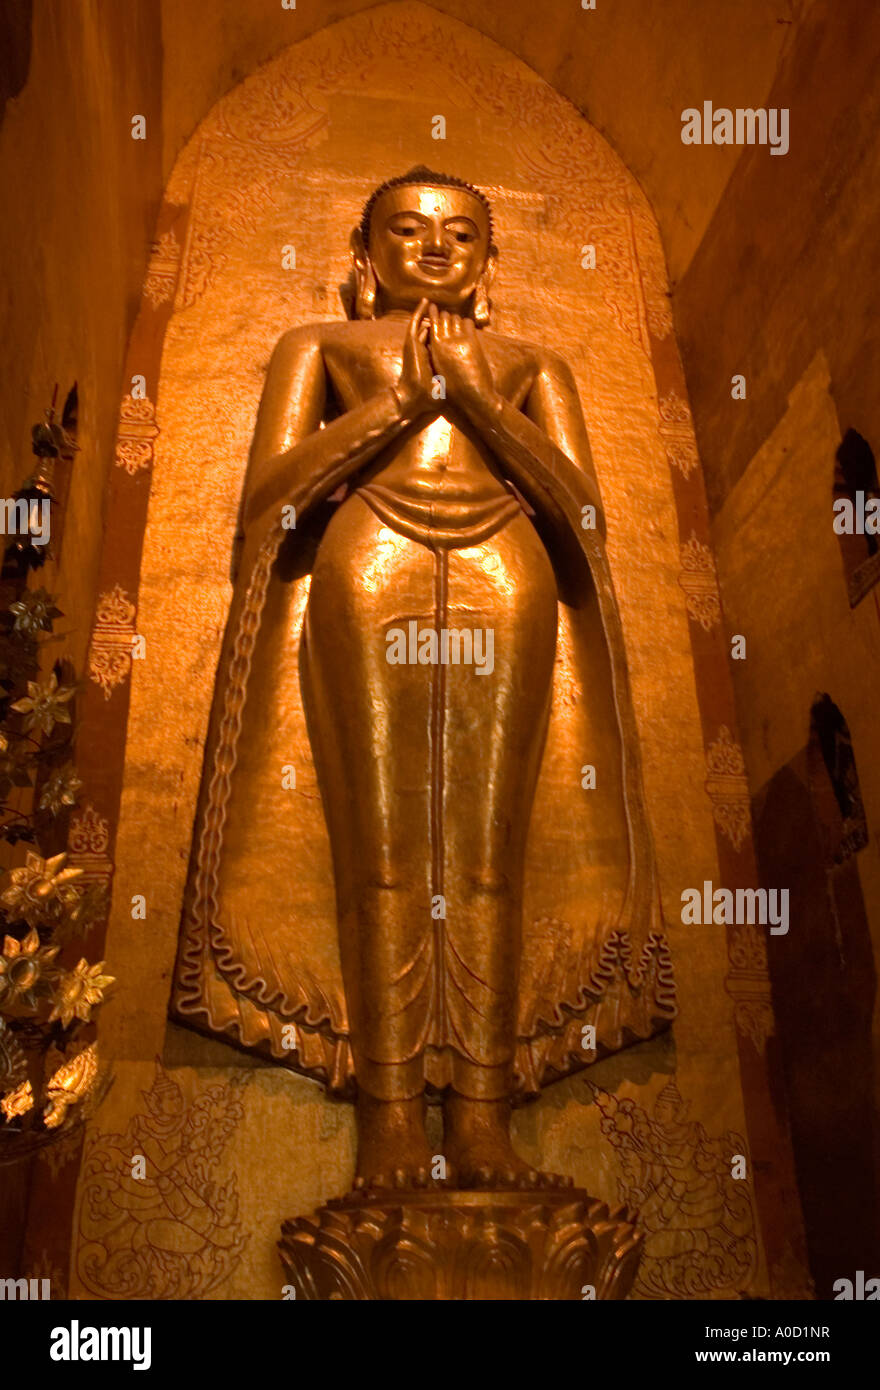 Stock photograph of the Buddha image in the Ananda Pahto at Bagan in Myanmar 2006 Stock Photo